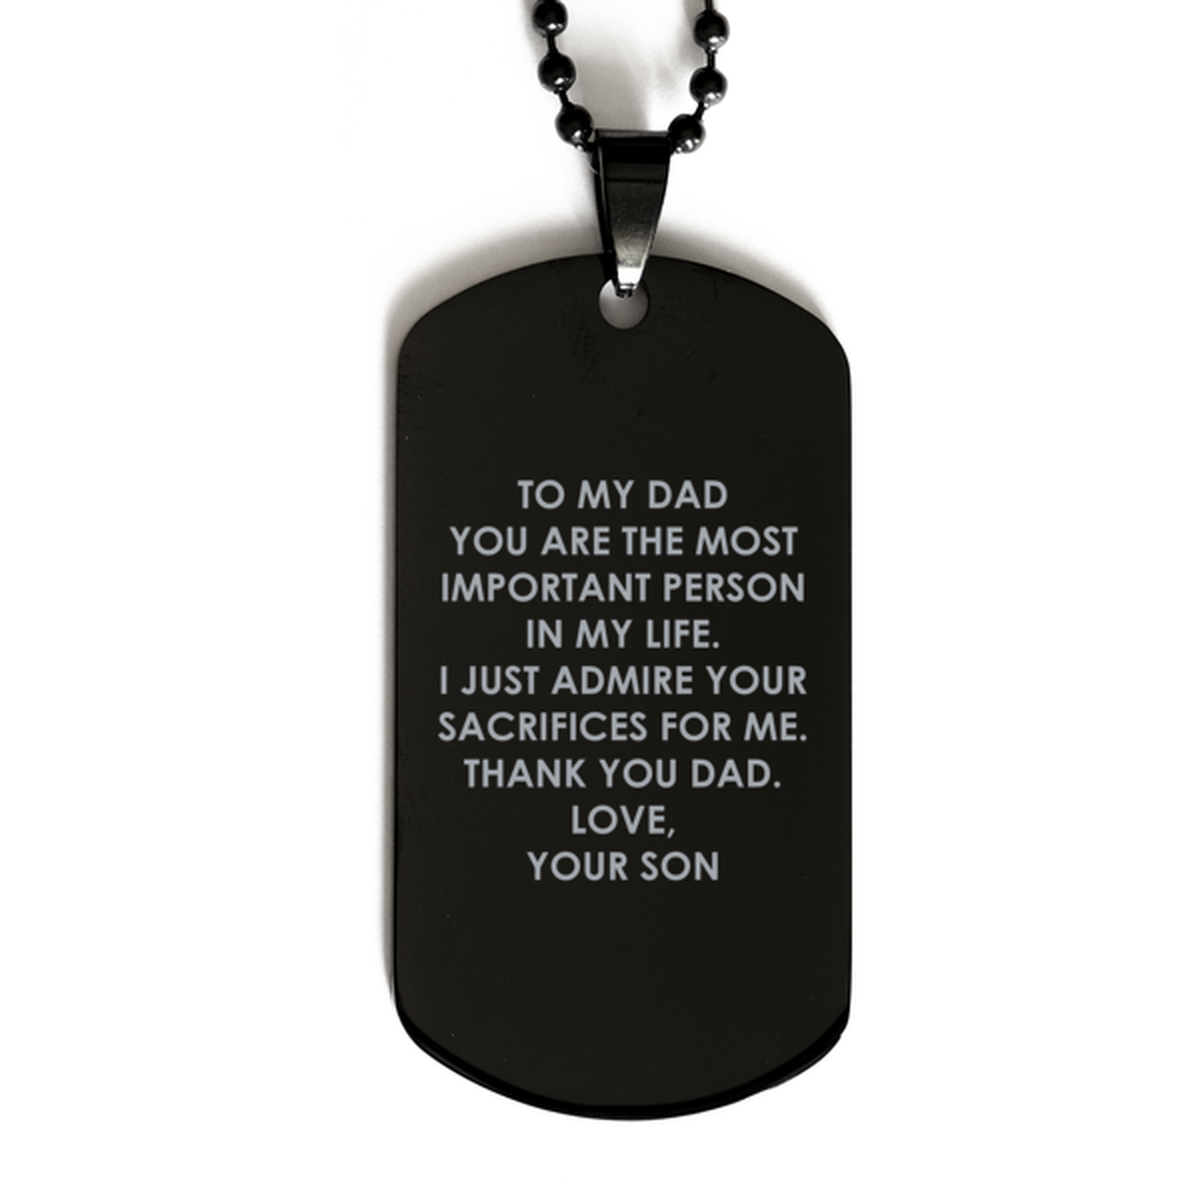 To My Dad Black Dog Tag, You Are The Most Important Person, Fathers Day Gifts For Dad From Son, Birthday Gifts For Men